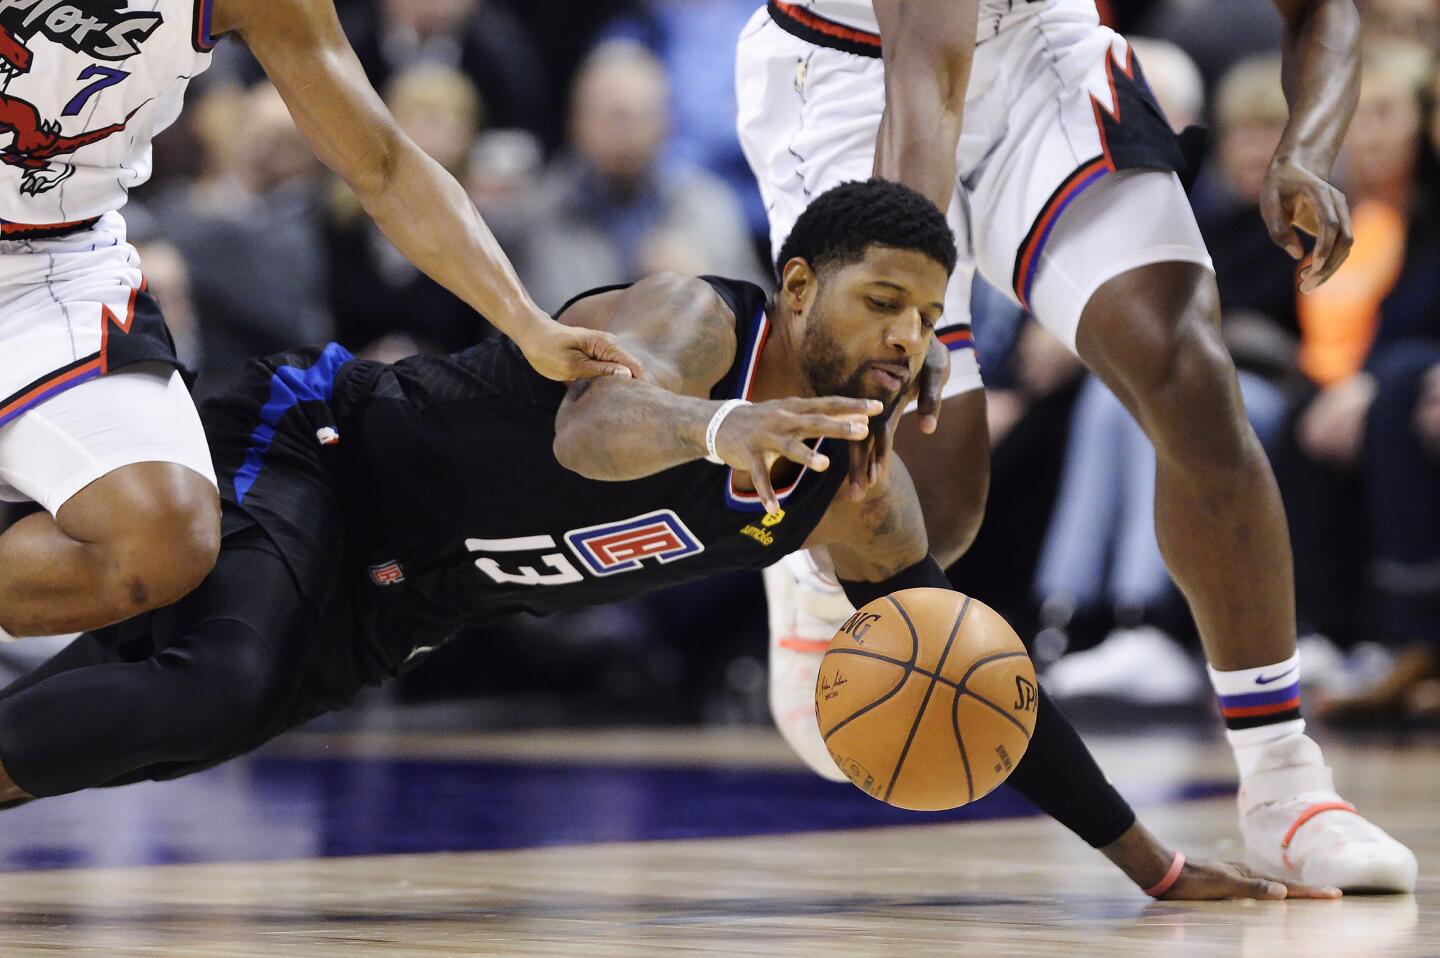 Clippers forward Paul George (13) dives for a loose ball during a game against the Raptors on Dec. 11.